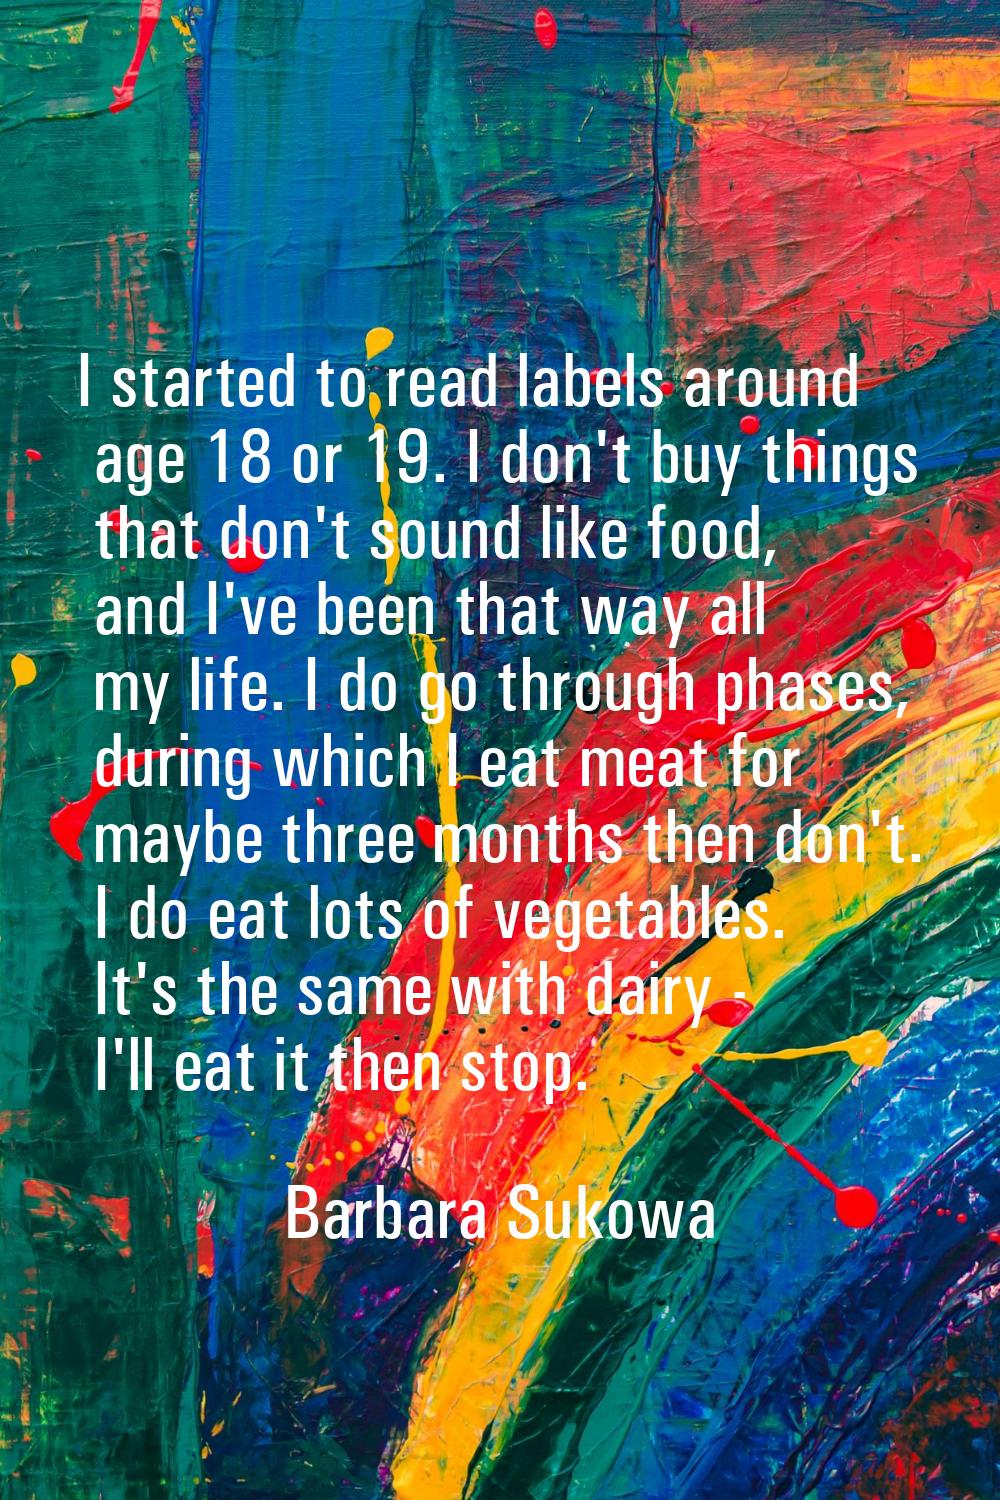 I started to read labels around age 18 or 19. I don't buy things that don't sound like food, and I'